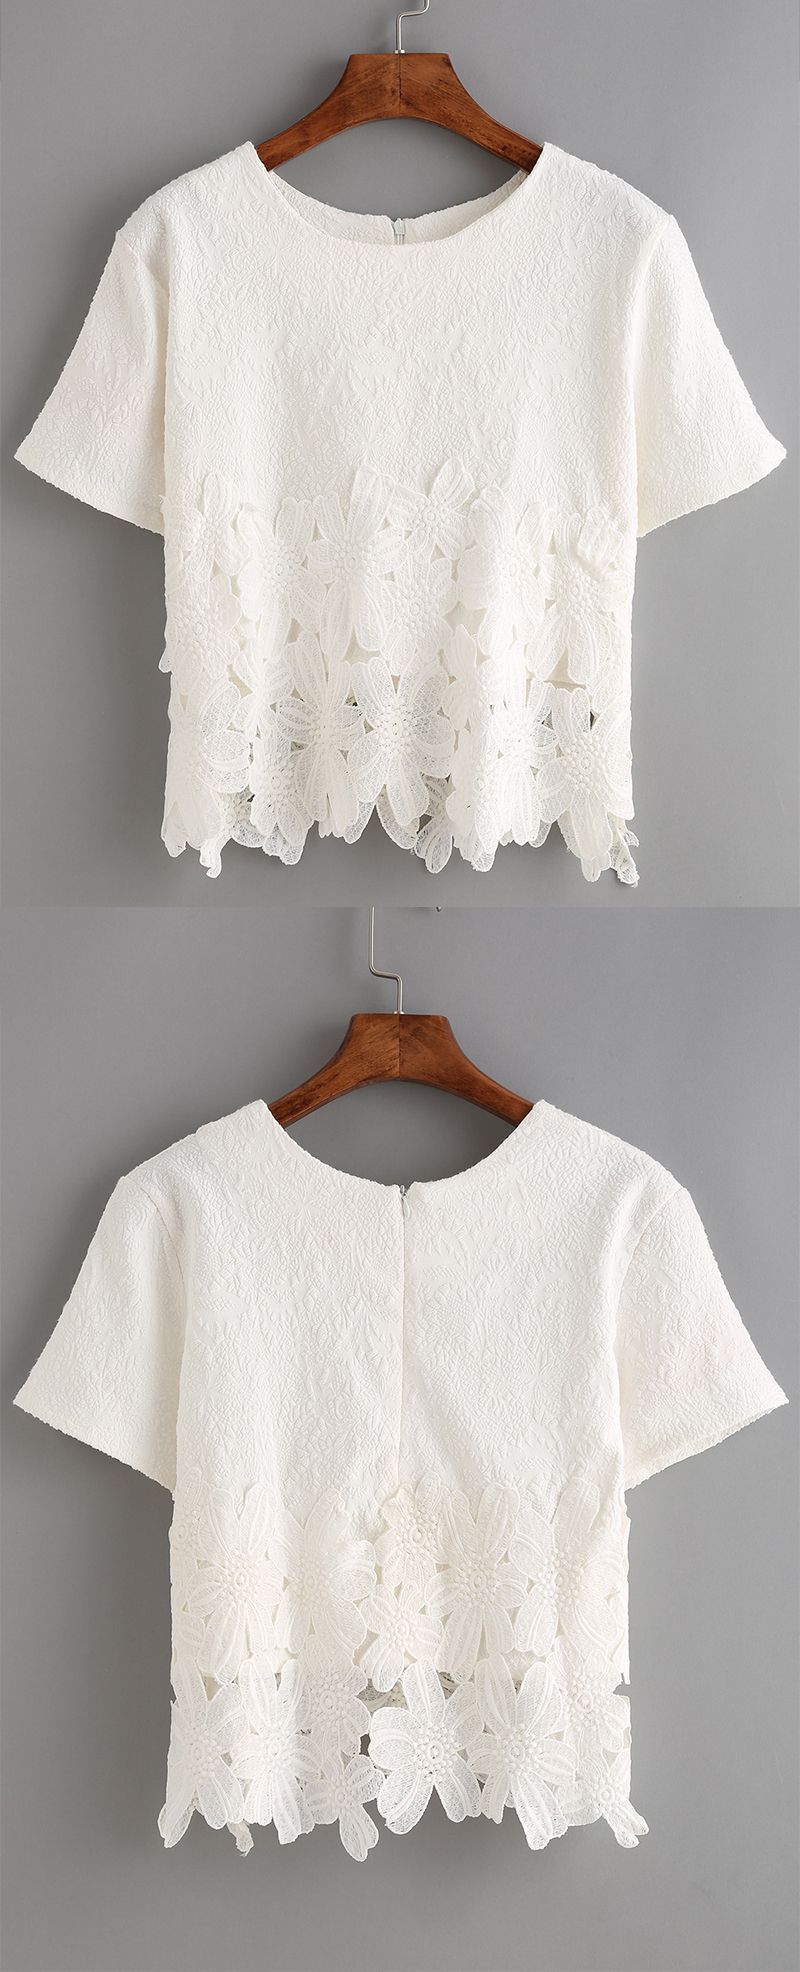 Absolutely love the delicate lace insert jacquard on this soft t-shirt. Super cute white lace tee. Best fo